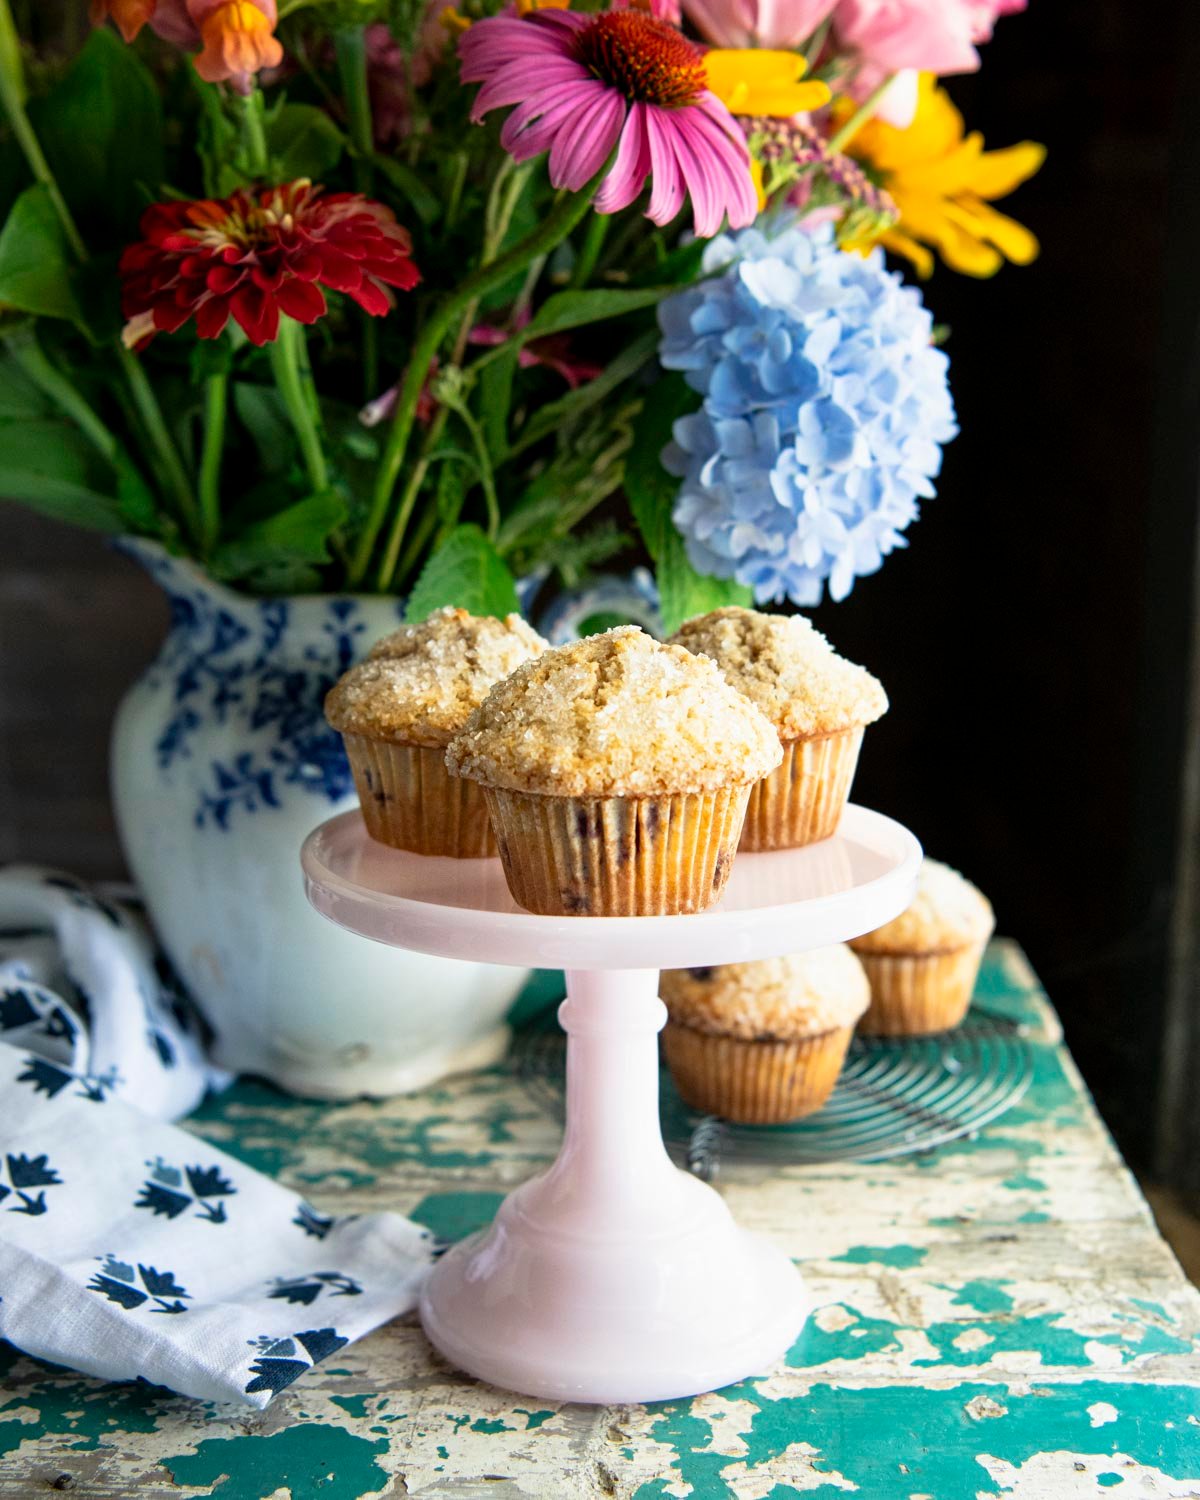 Three blackberry muffins on a small pink cake stand.